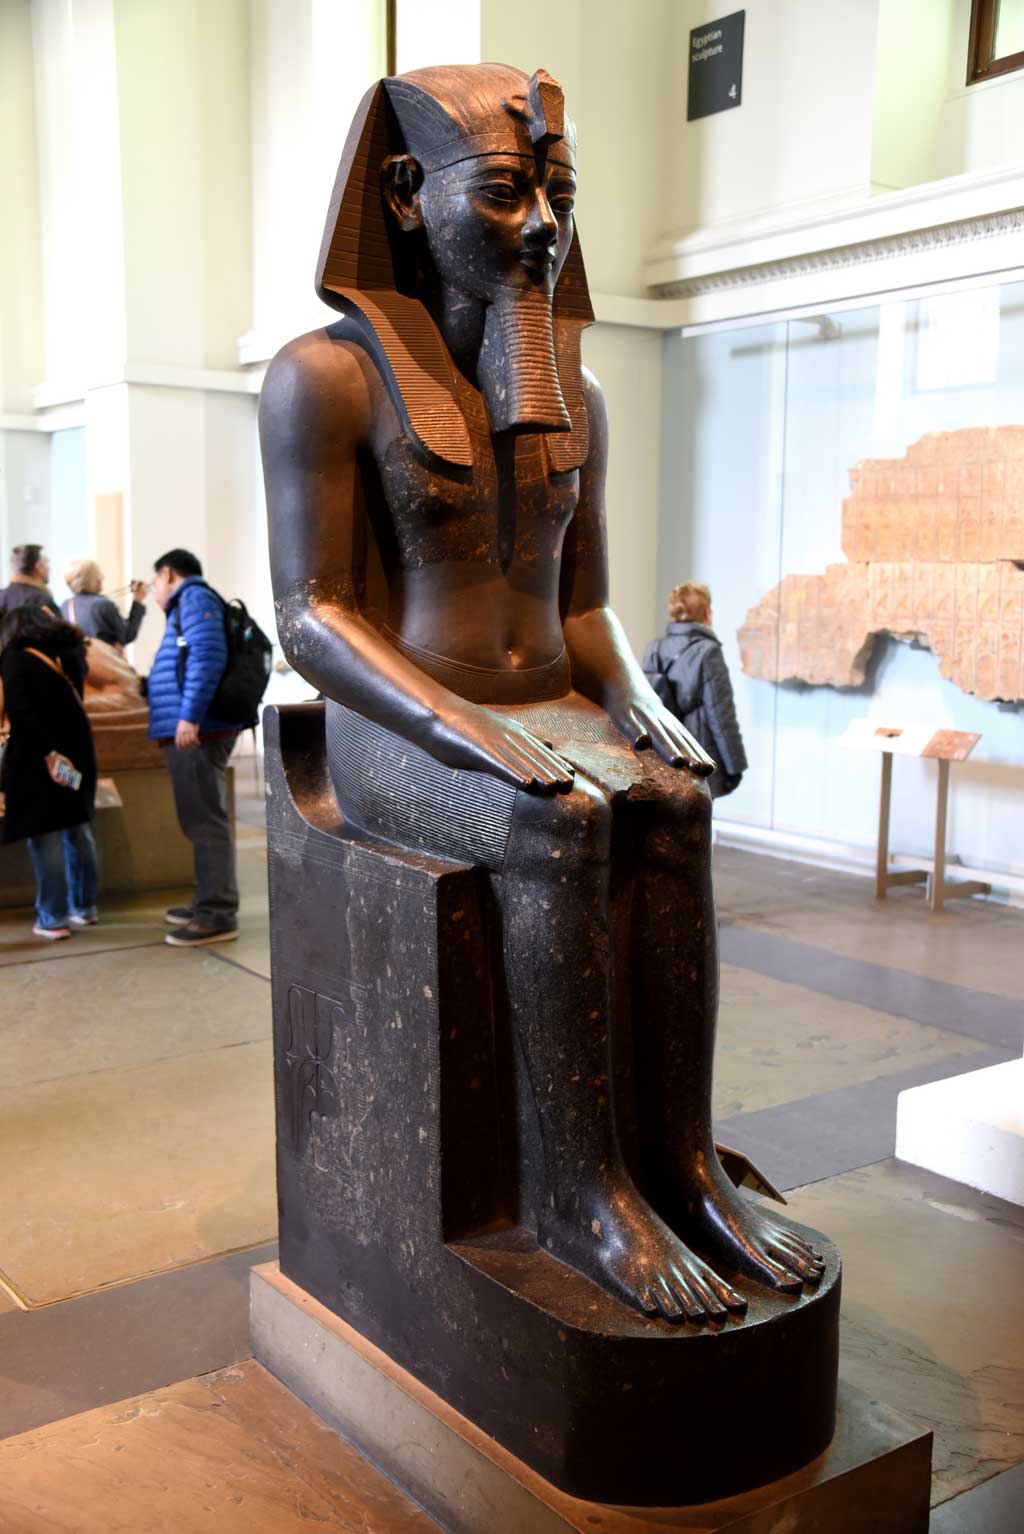 The picture is of a seated Amenhotep III, carved out of black stone. Here, the king sits while looking straight ahead, with hands placed flatly on his bent knees.